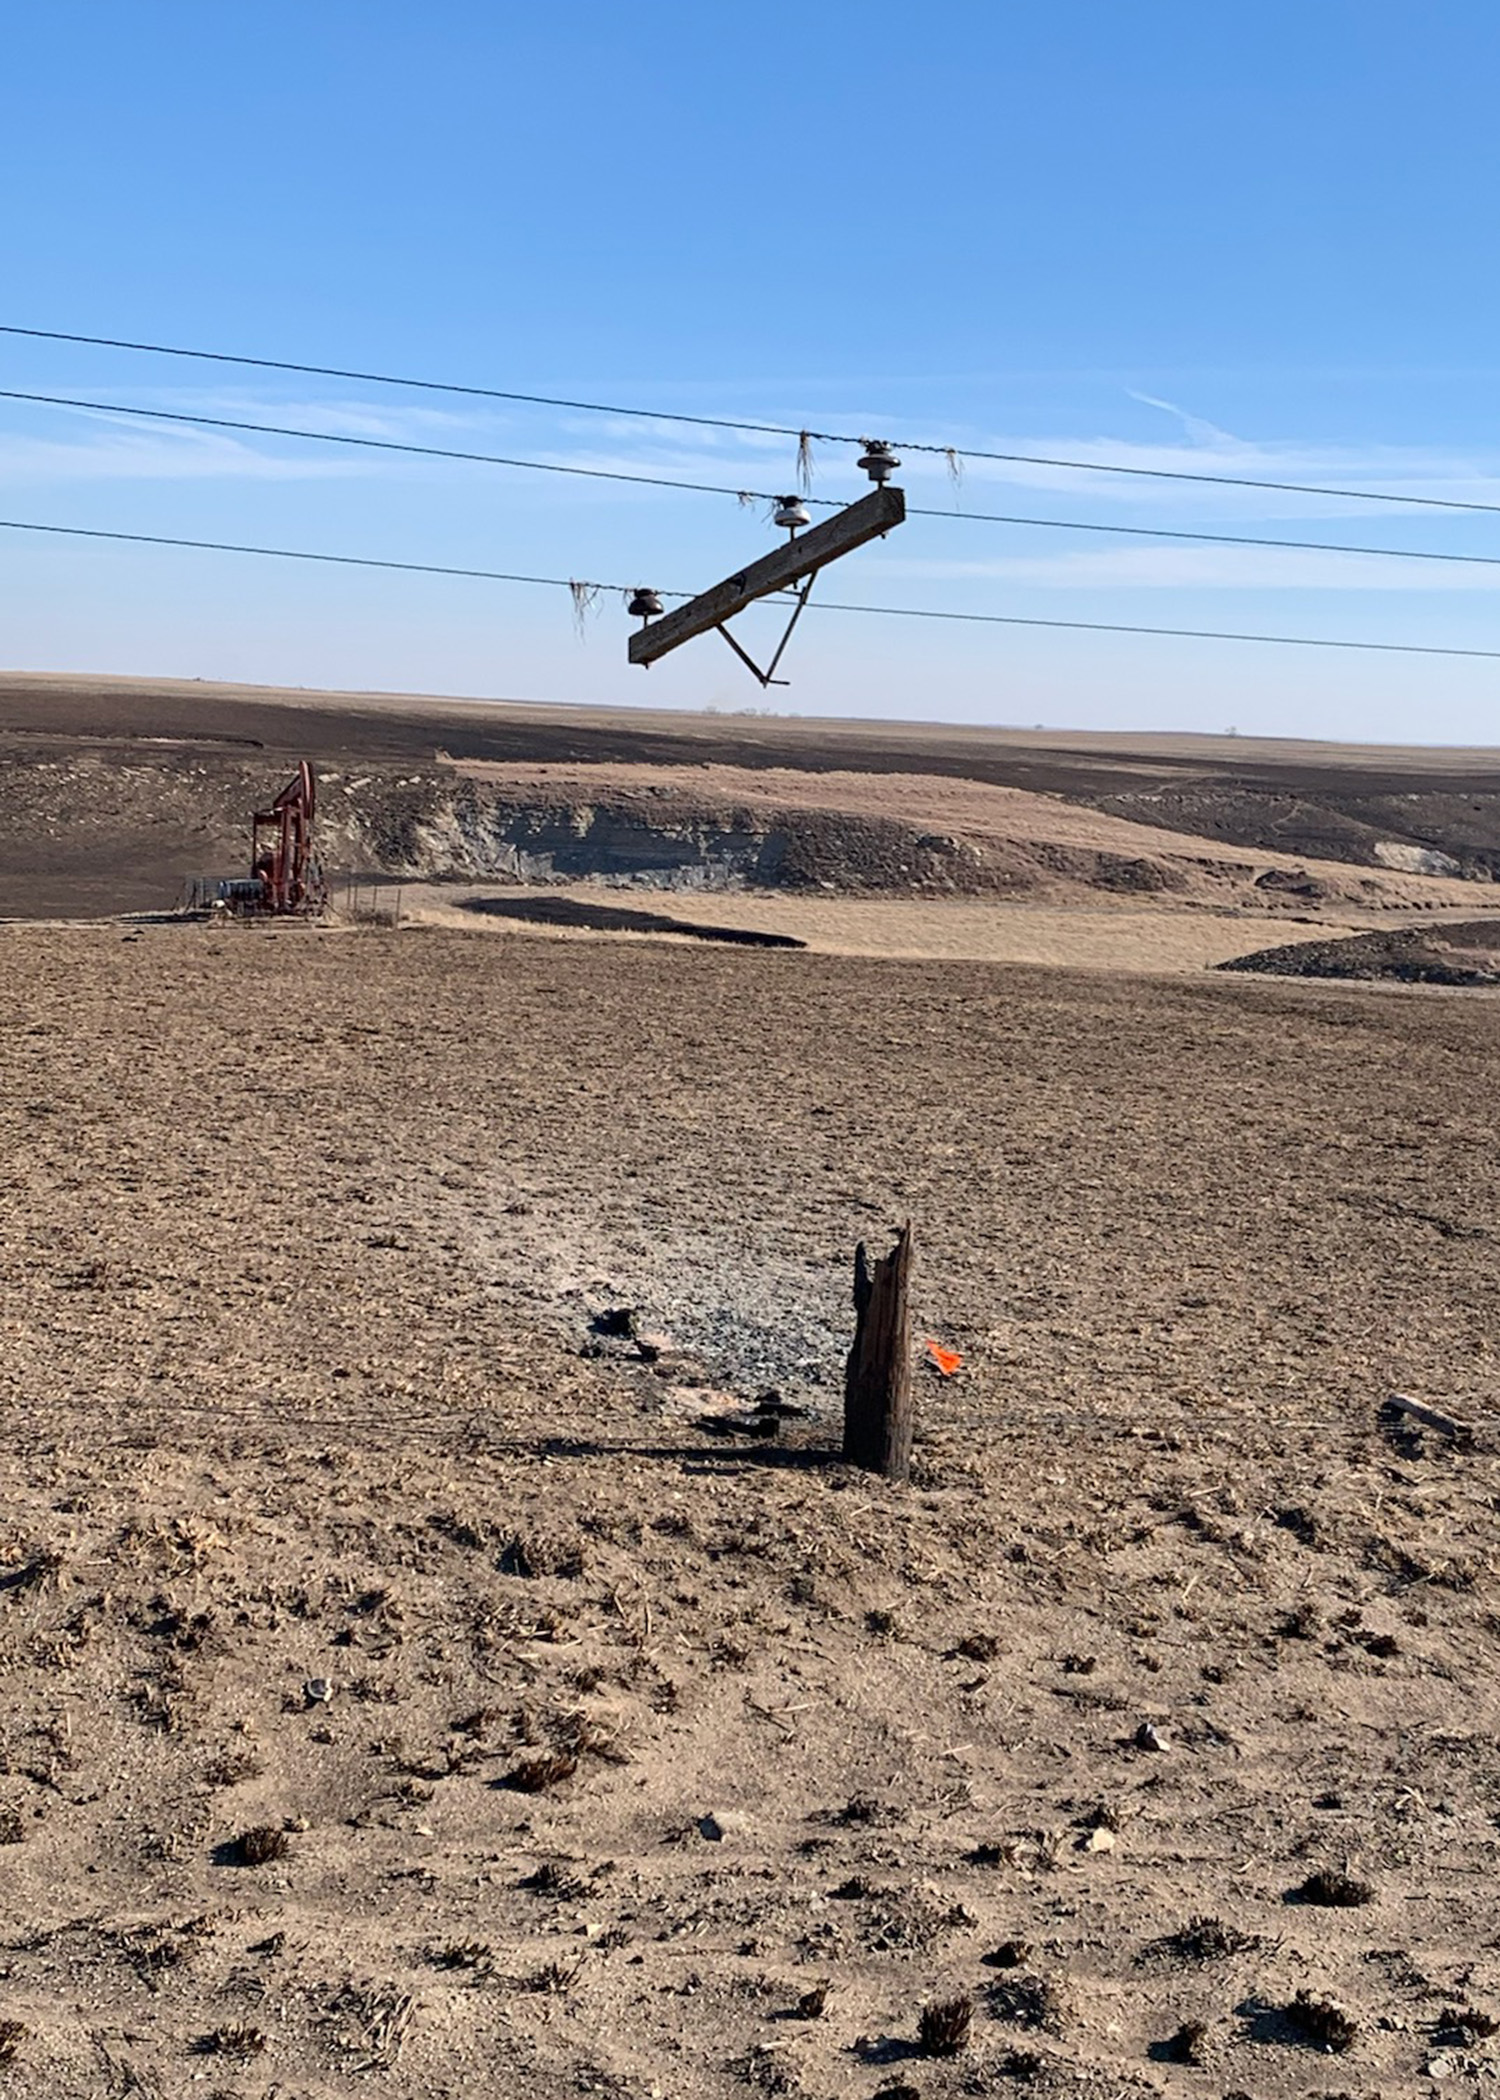 A power pole crossarm remains suspended in the air by the power lines, while the midsection of the power pole is burned away after a wildfire.